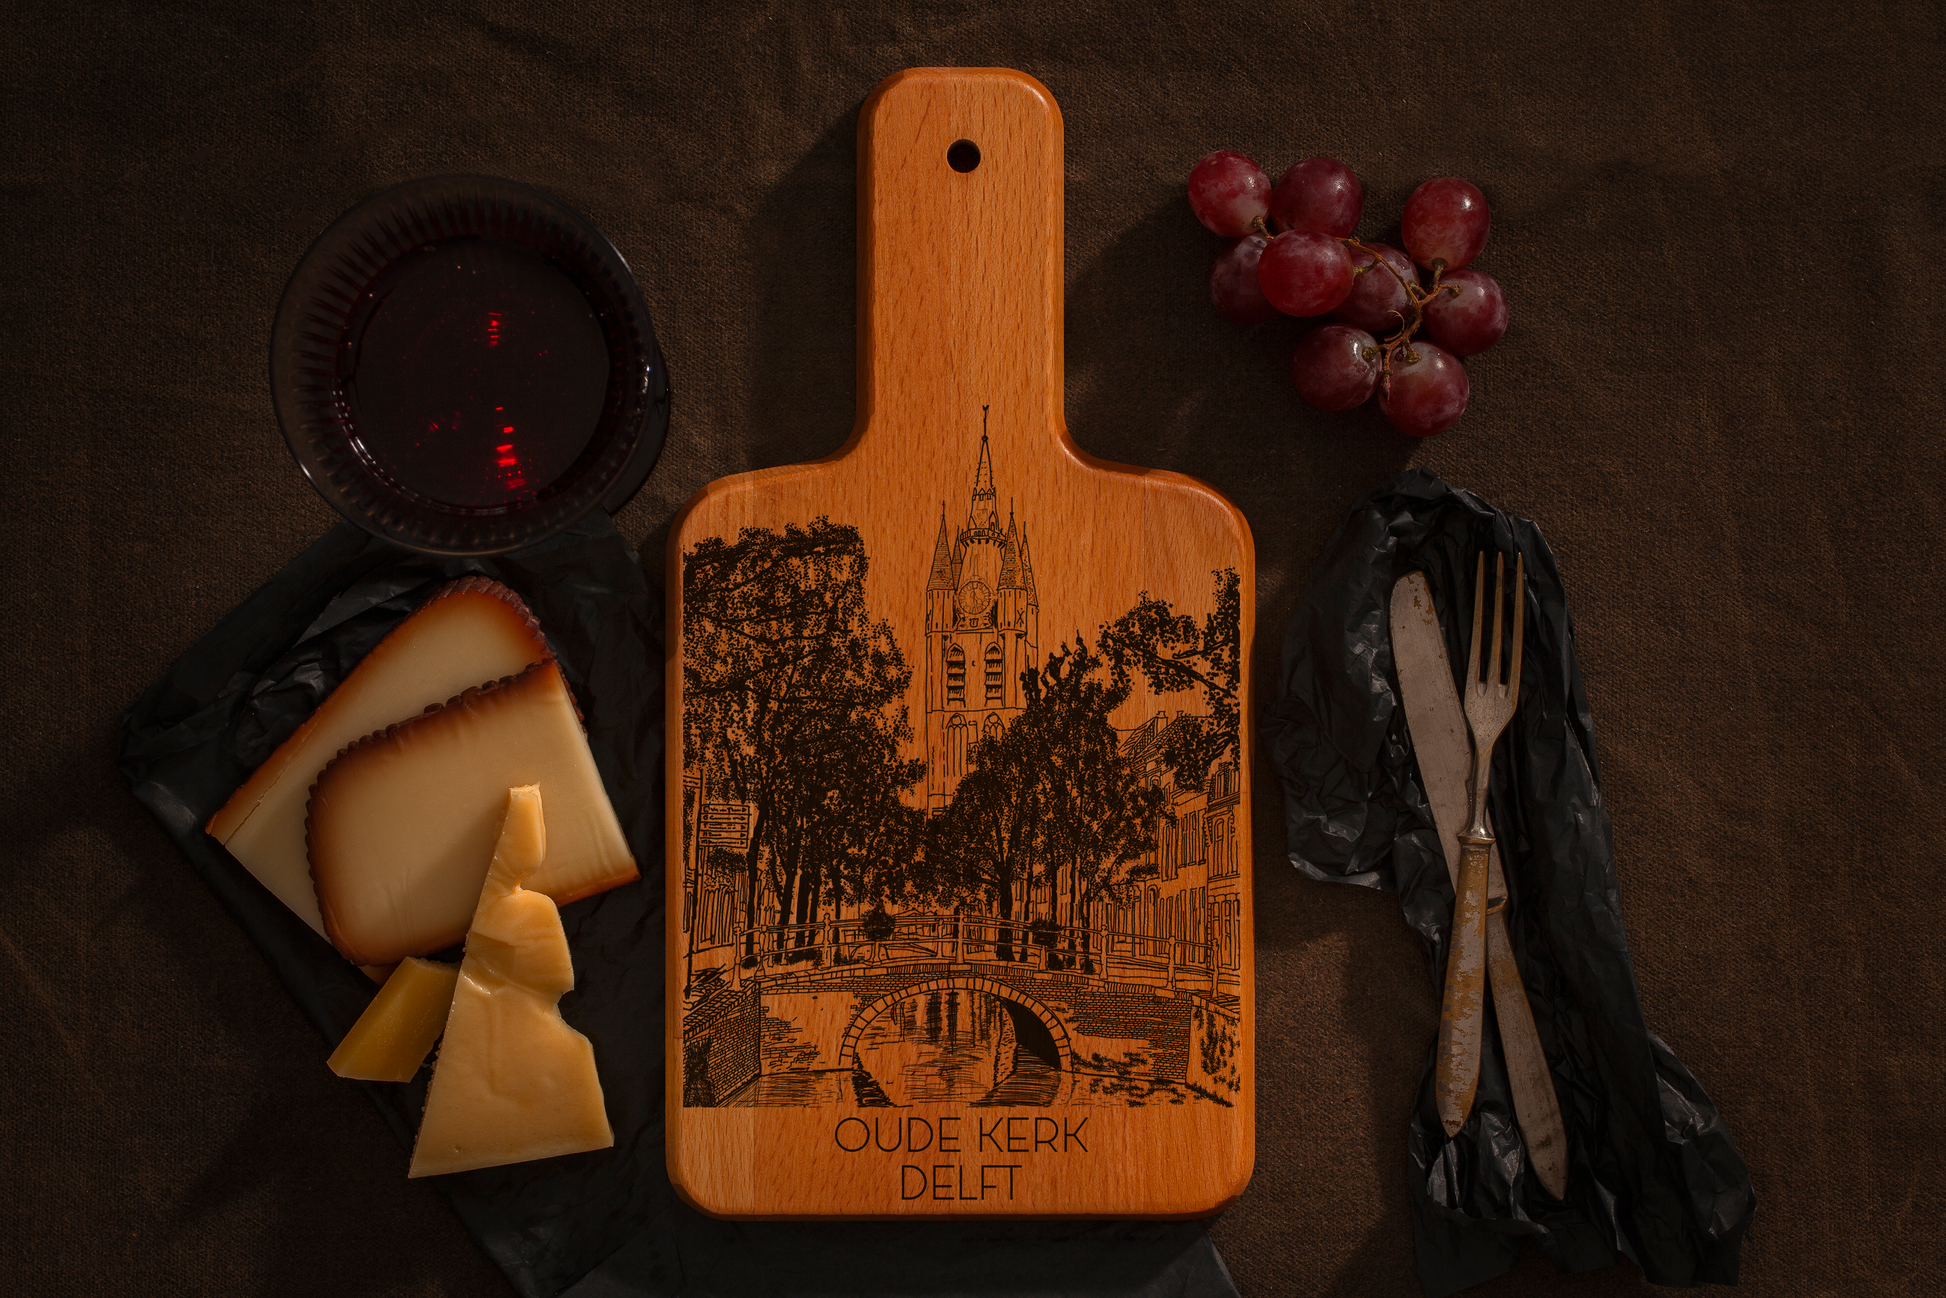 Delft, Oude Kerk, cheese board, main front